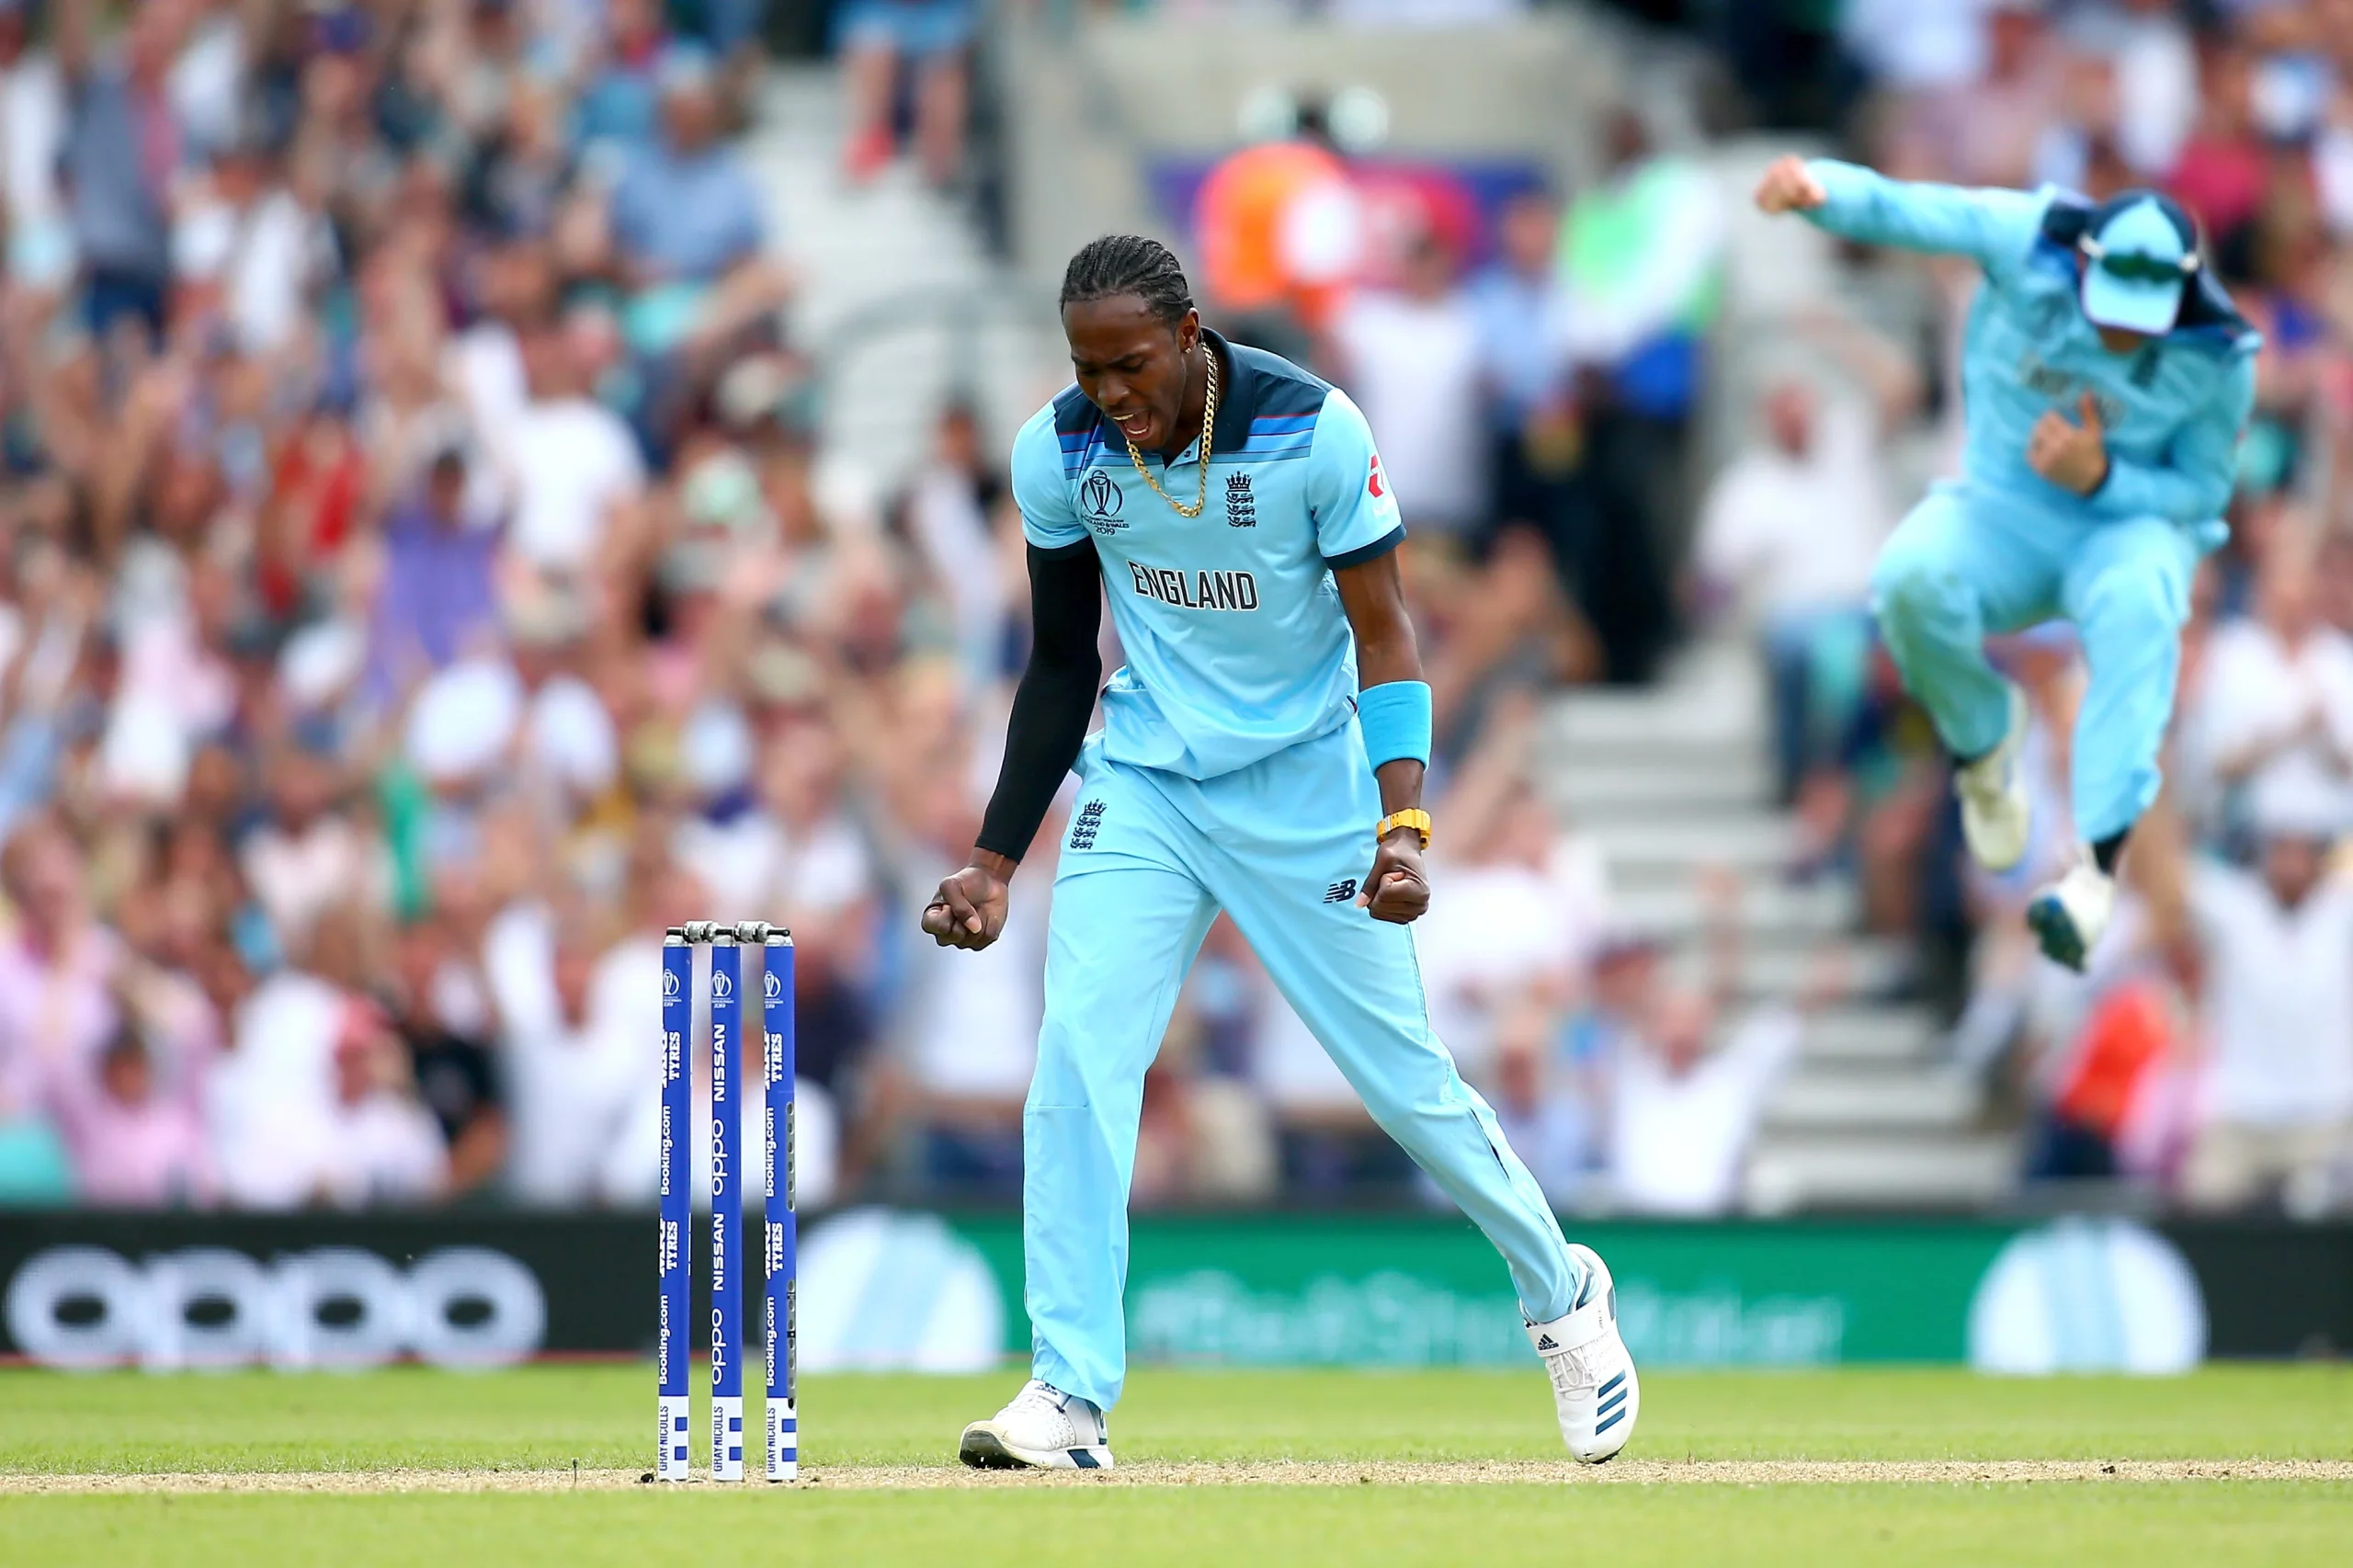 REVEALED: Will Jofra Archer Play In The ICC Cricket World Cup 2023?